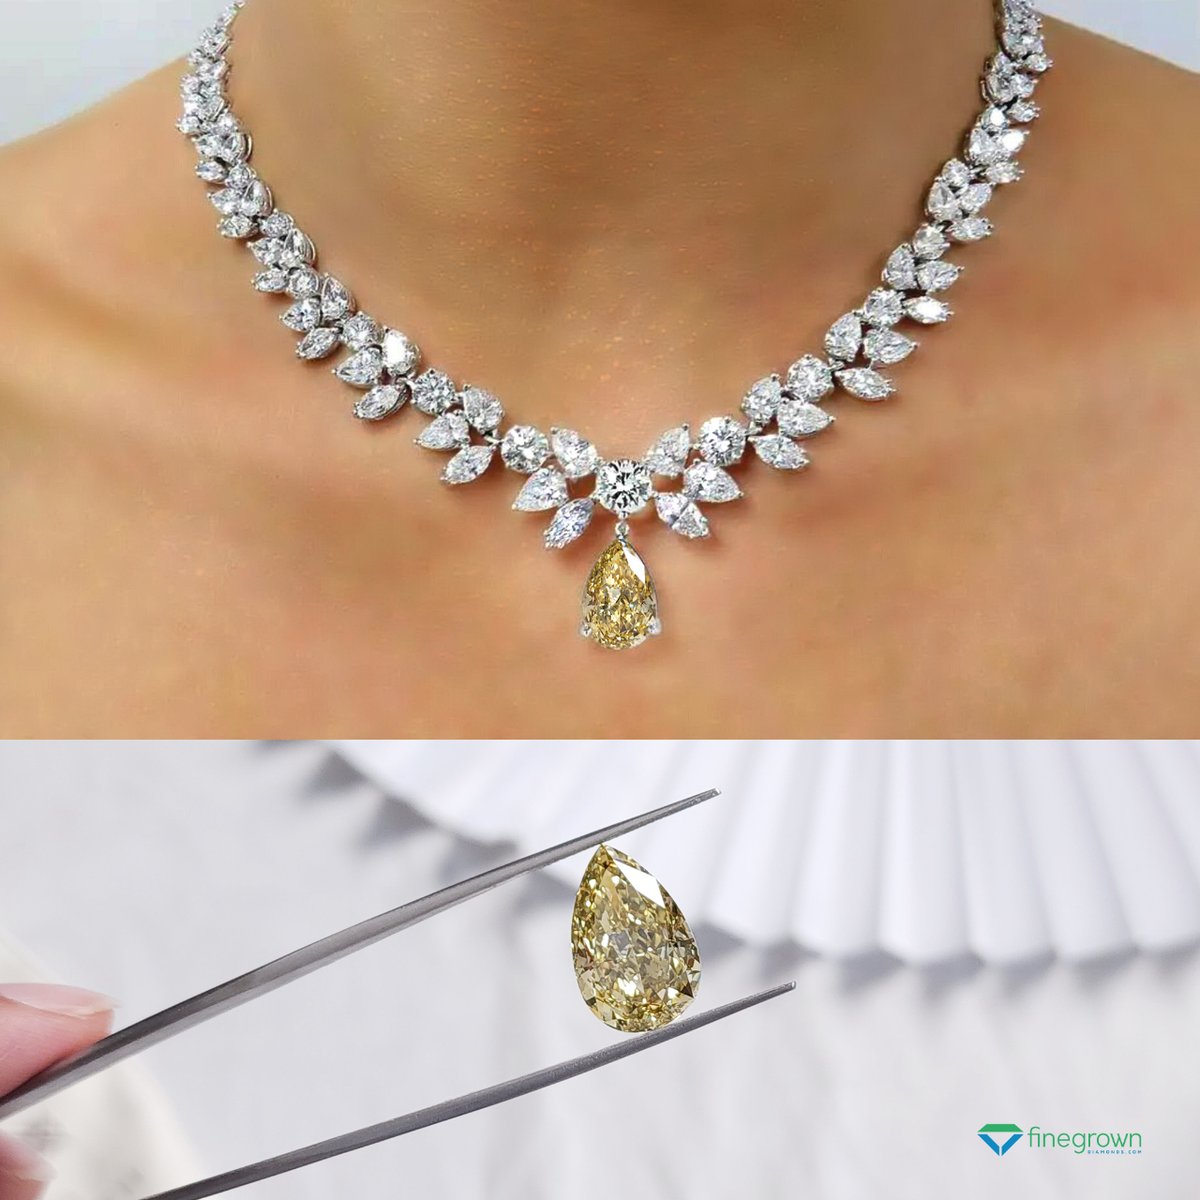 ✨ Dazzle in the brilliance of our Vivid Yellow Pear Shaped Lab-Grown Diamond Necklace! 💎🌟

#LabGrownDiamond #EcoLuxury #DiamondNecklace #YellowDiamond #SparkleAndShine #JewelryLovers #FashionStatement #EthicalFashion #LuxuryJewelry #finegrowndiamonds